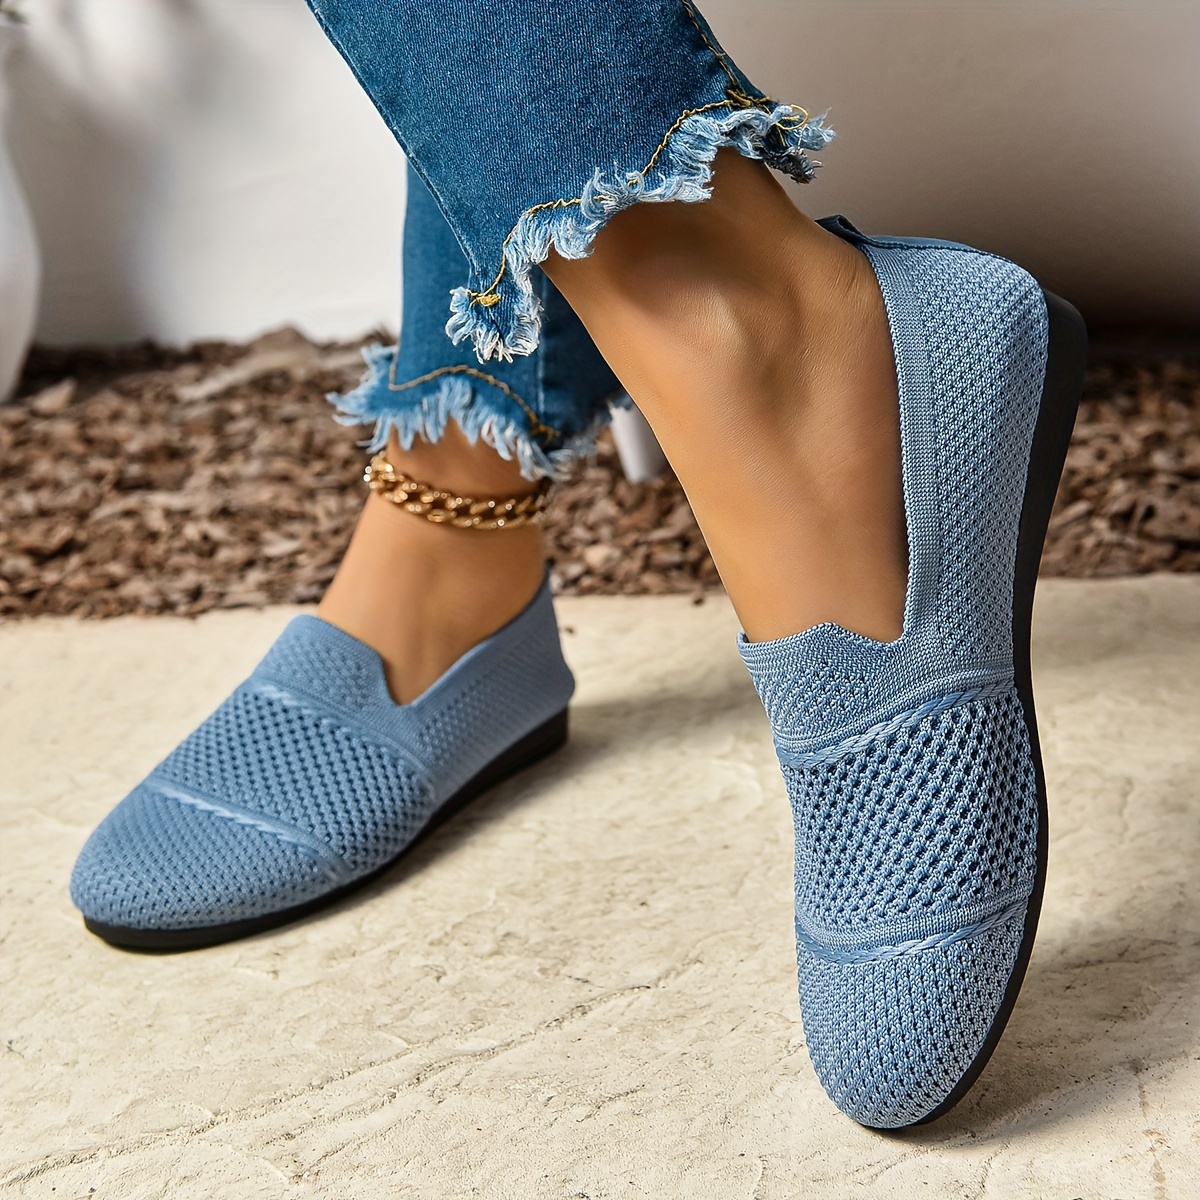 

Women's Casual Slip-on Flat Shoes, Breathable & Lightweight Soft Sole Loafers, Versatile Everyday Footwear